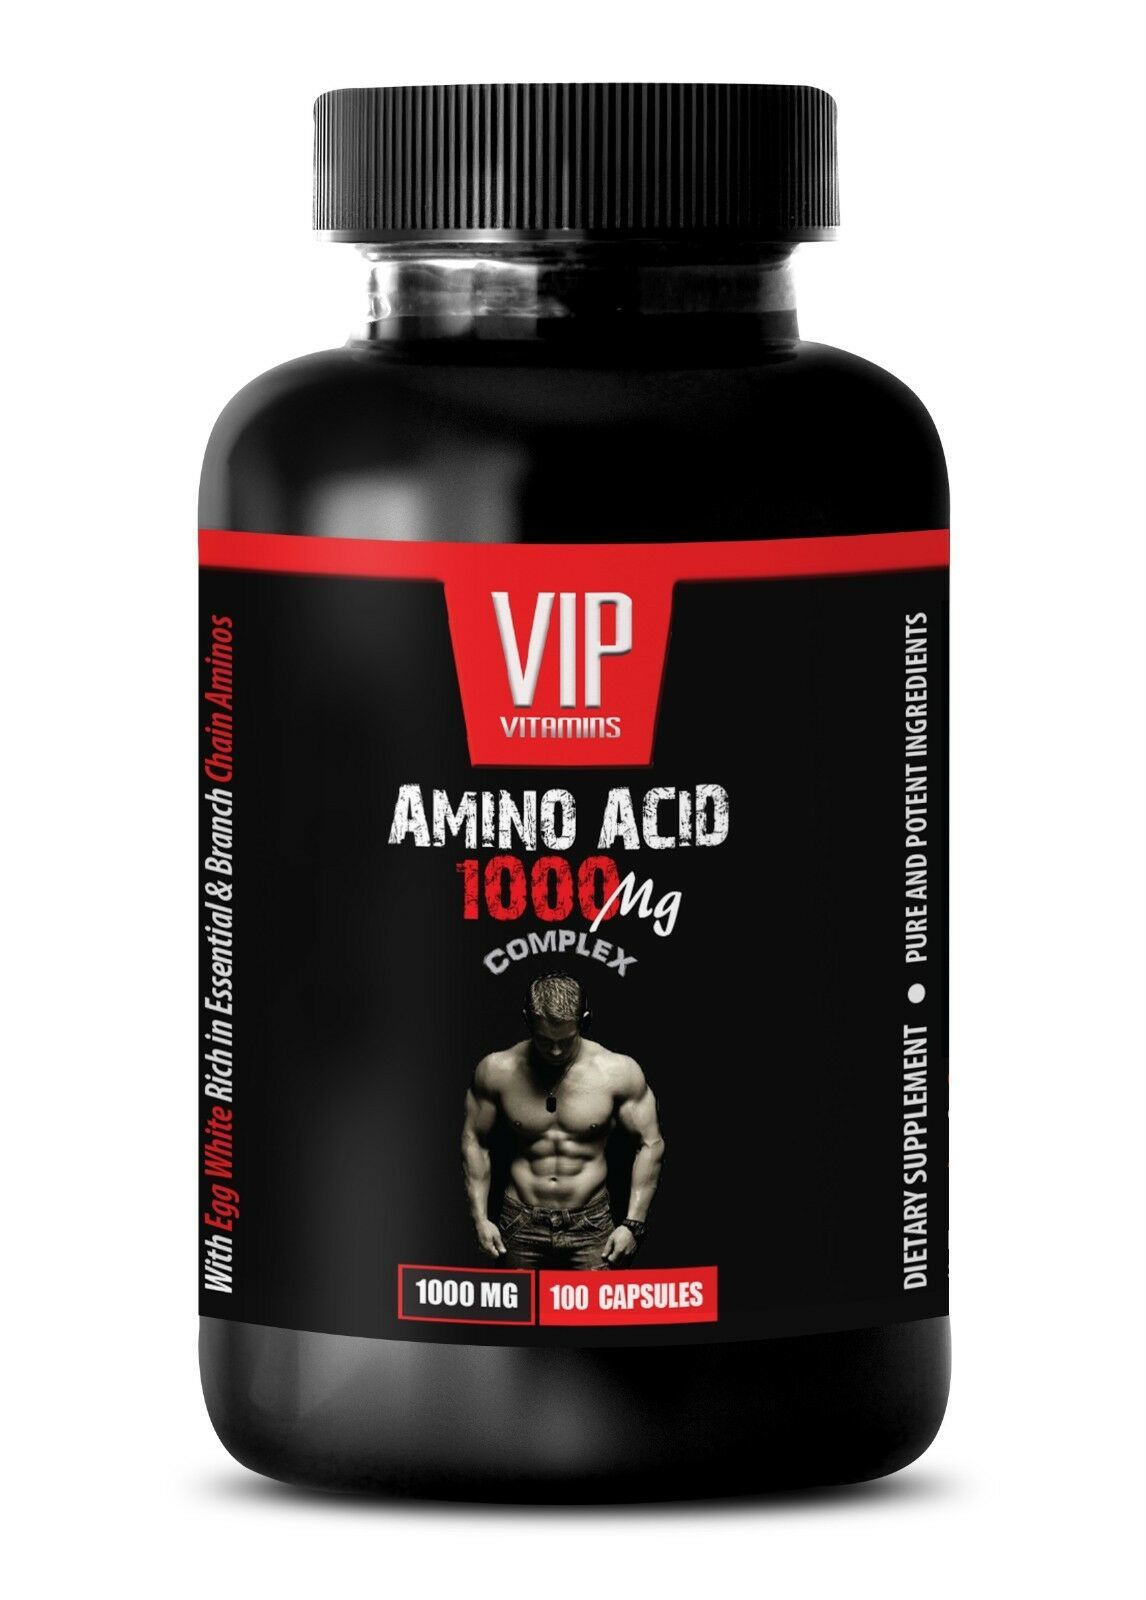 Workout Supplement Amino Acid 1000mg Increase Muscle Growth 1 Bottle Vitamins And Lifestyle 0426